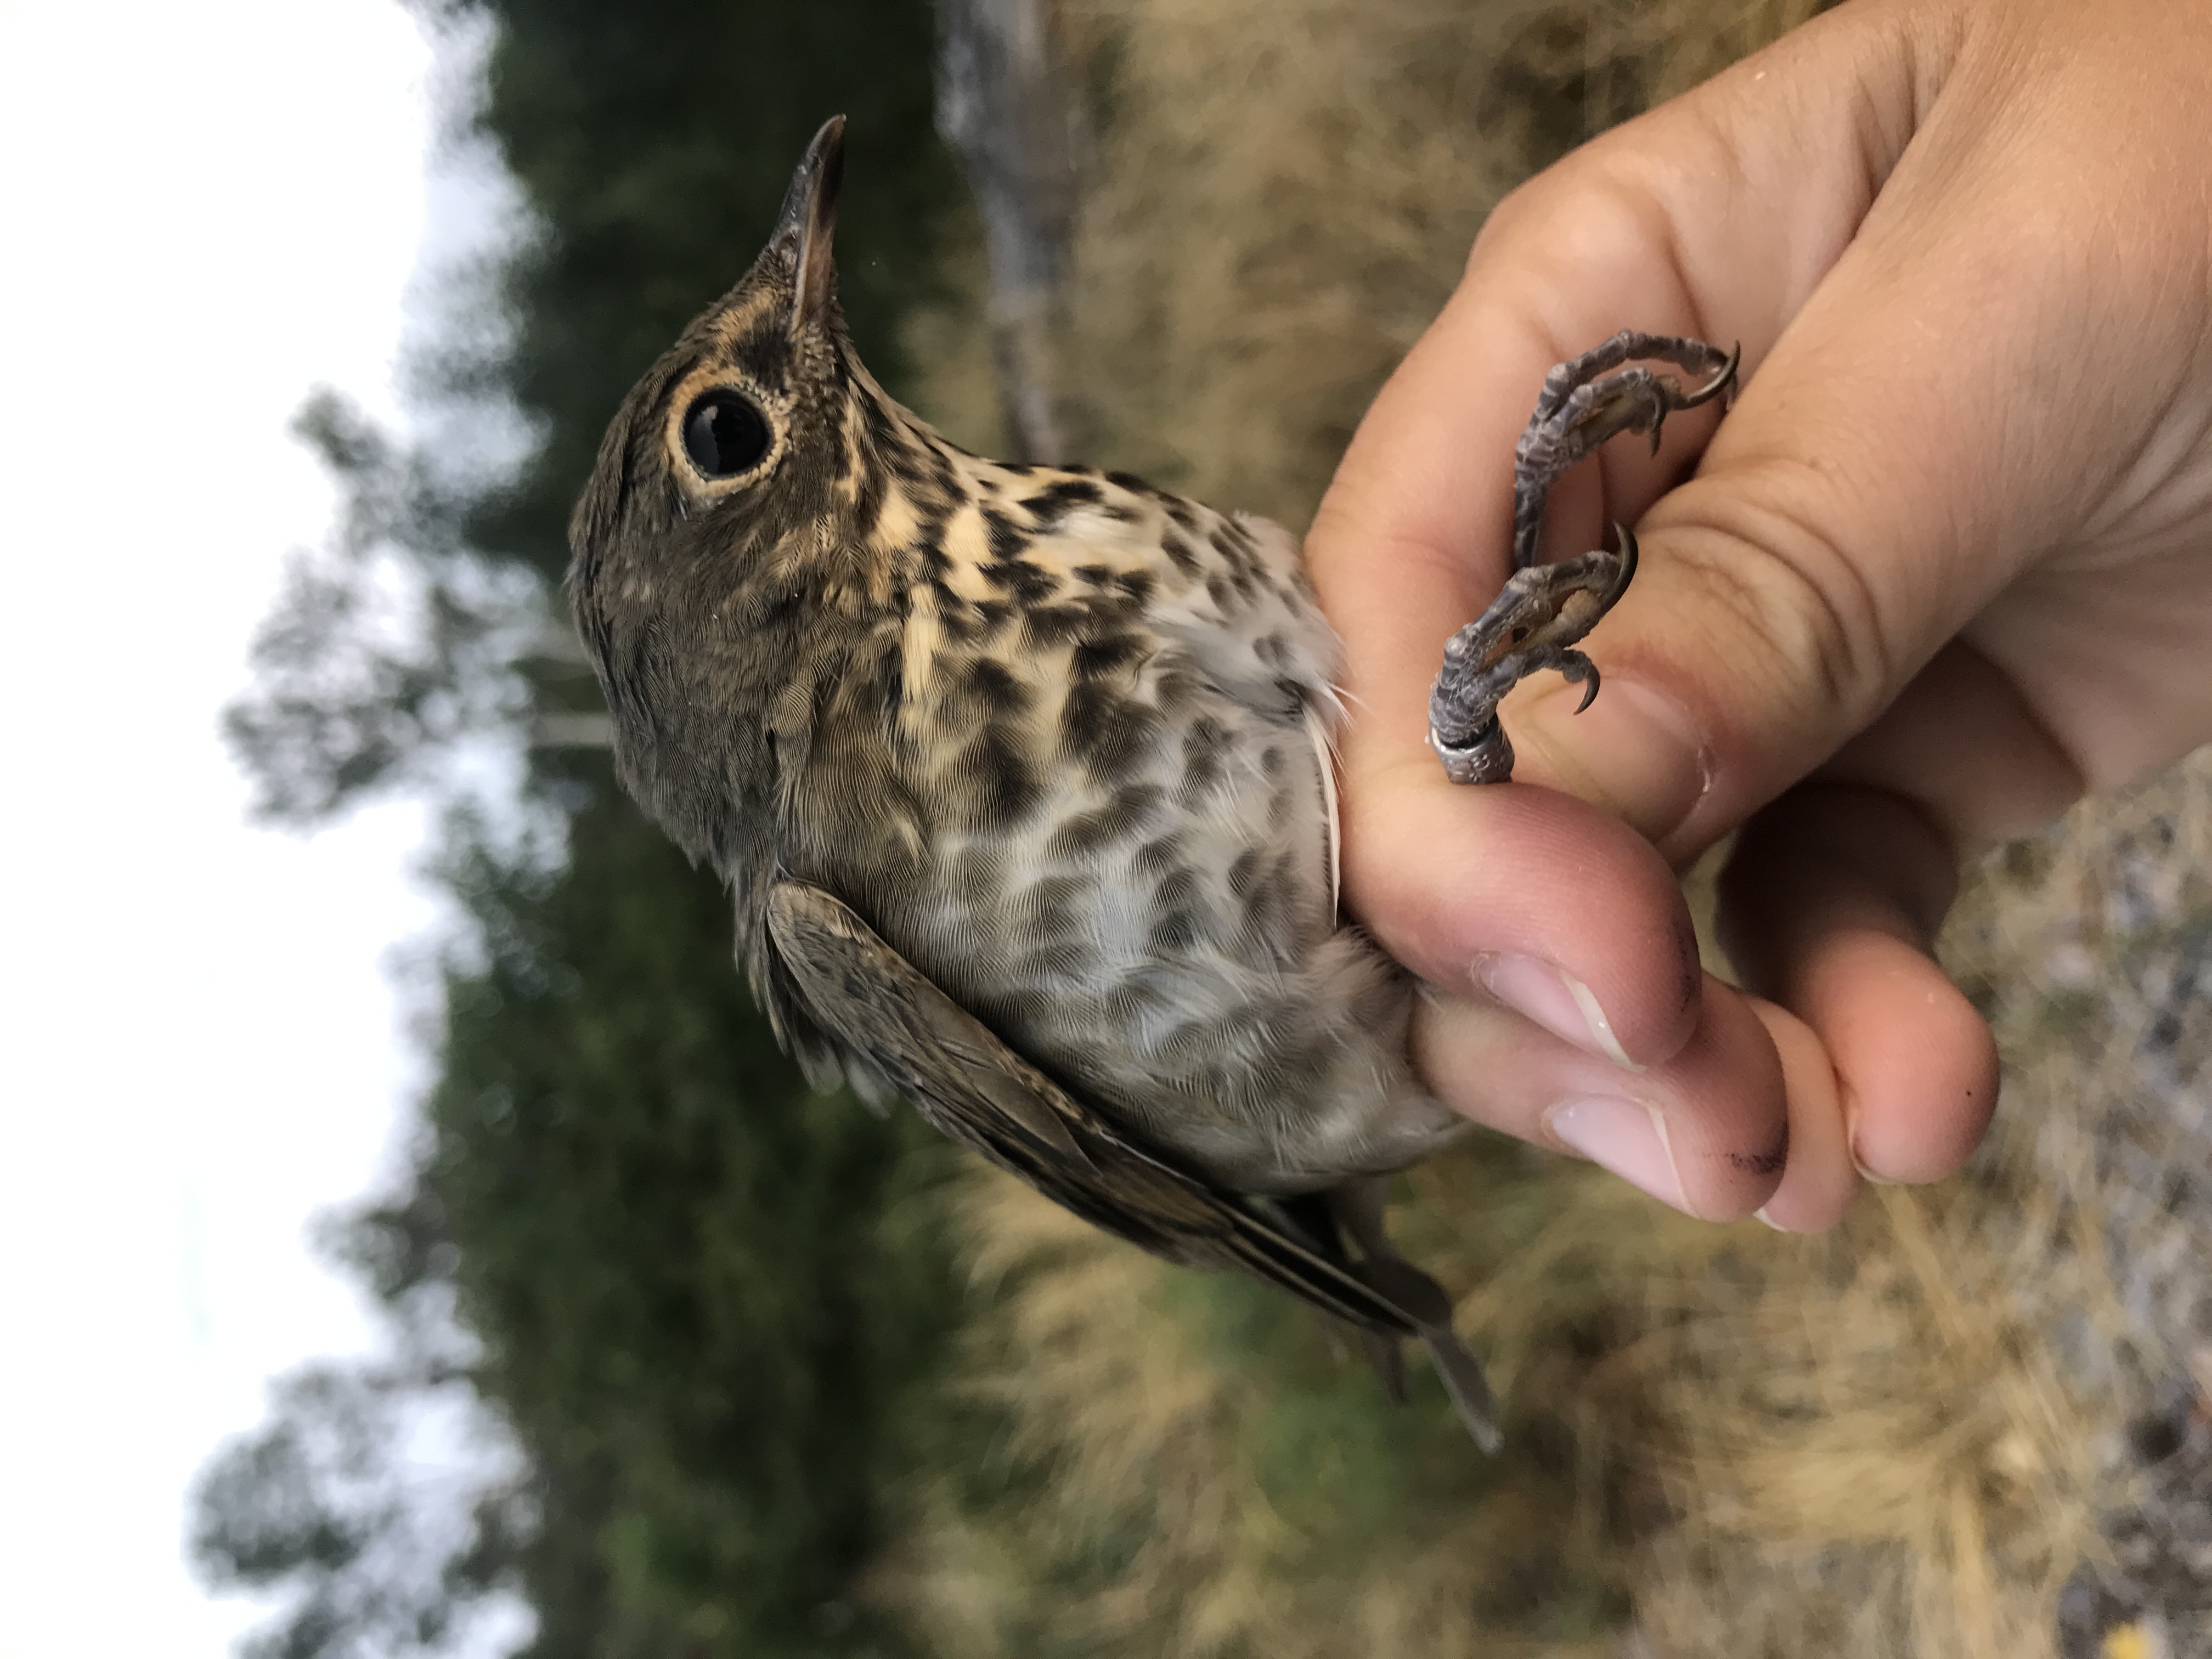 A banded Swainson's Thrush is ready to be released and continue its southward migration